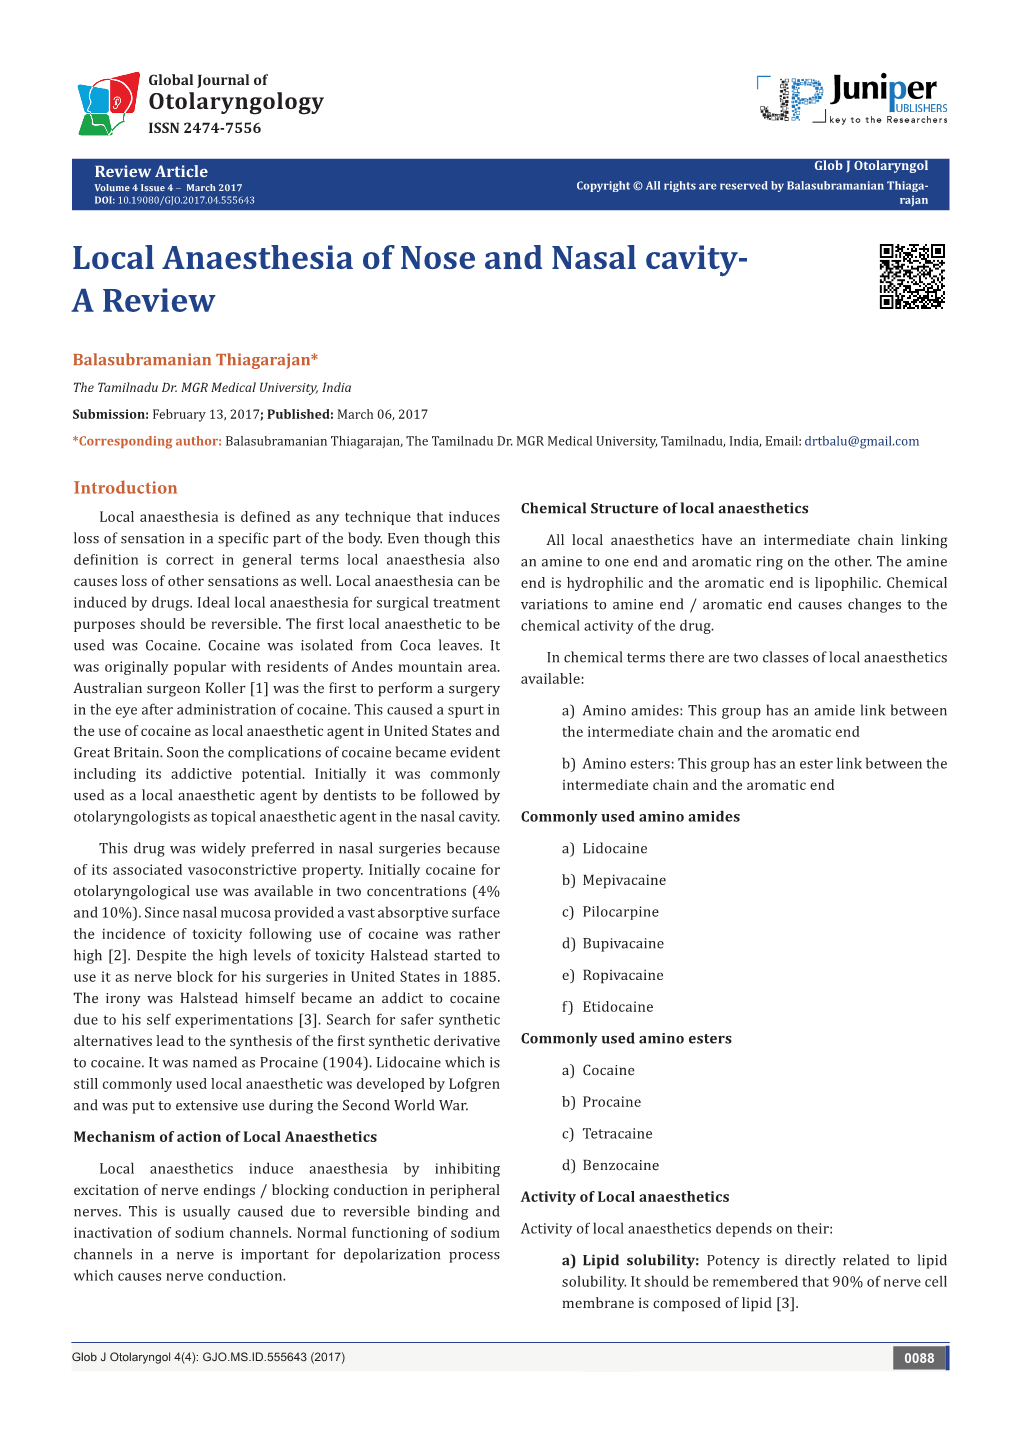 Local Anaesthesia of Nose and Nasal Cavity- a Review